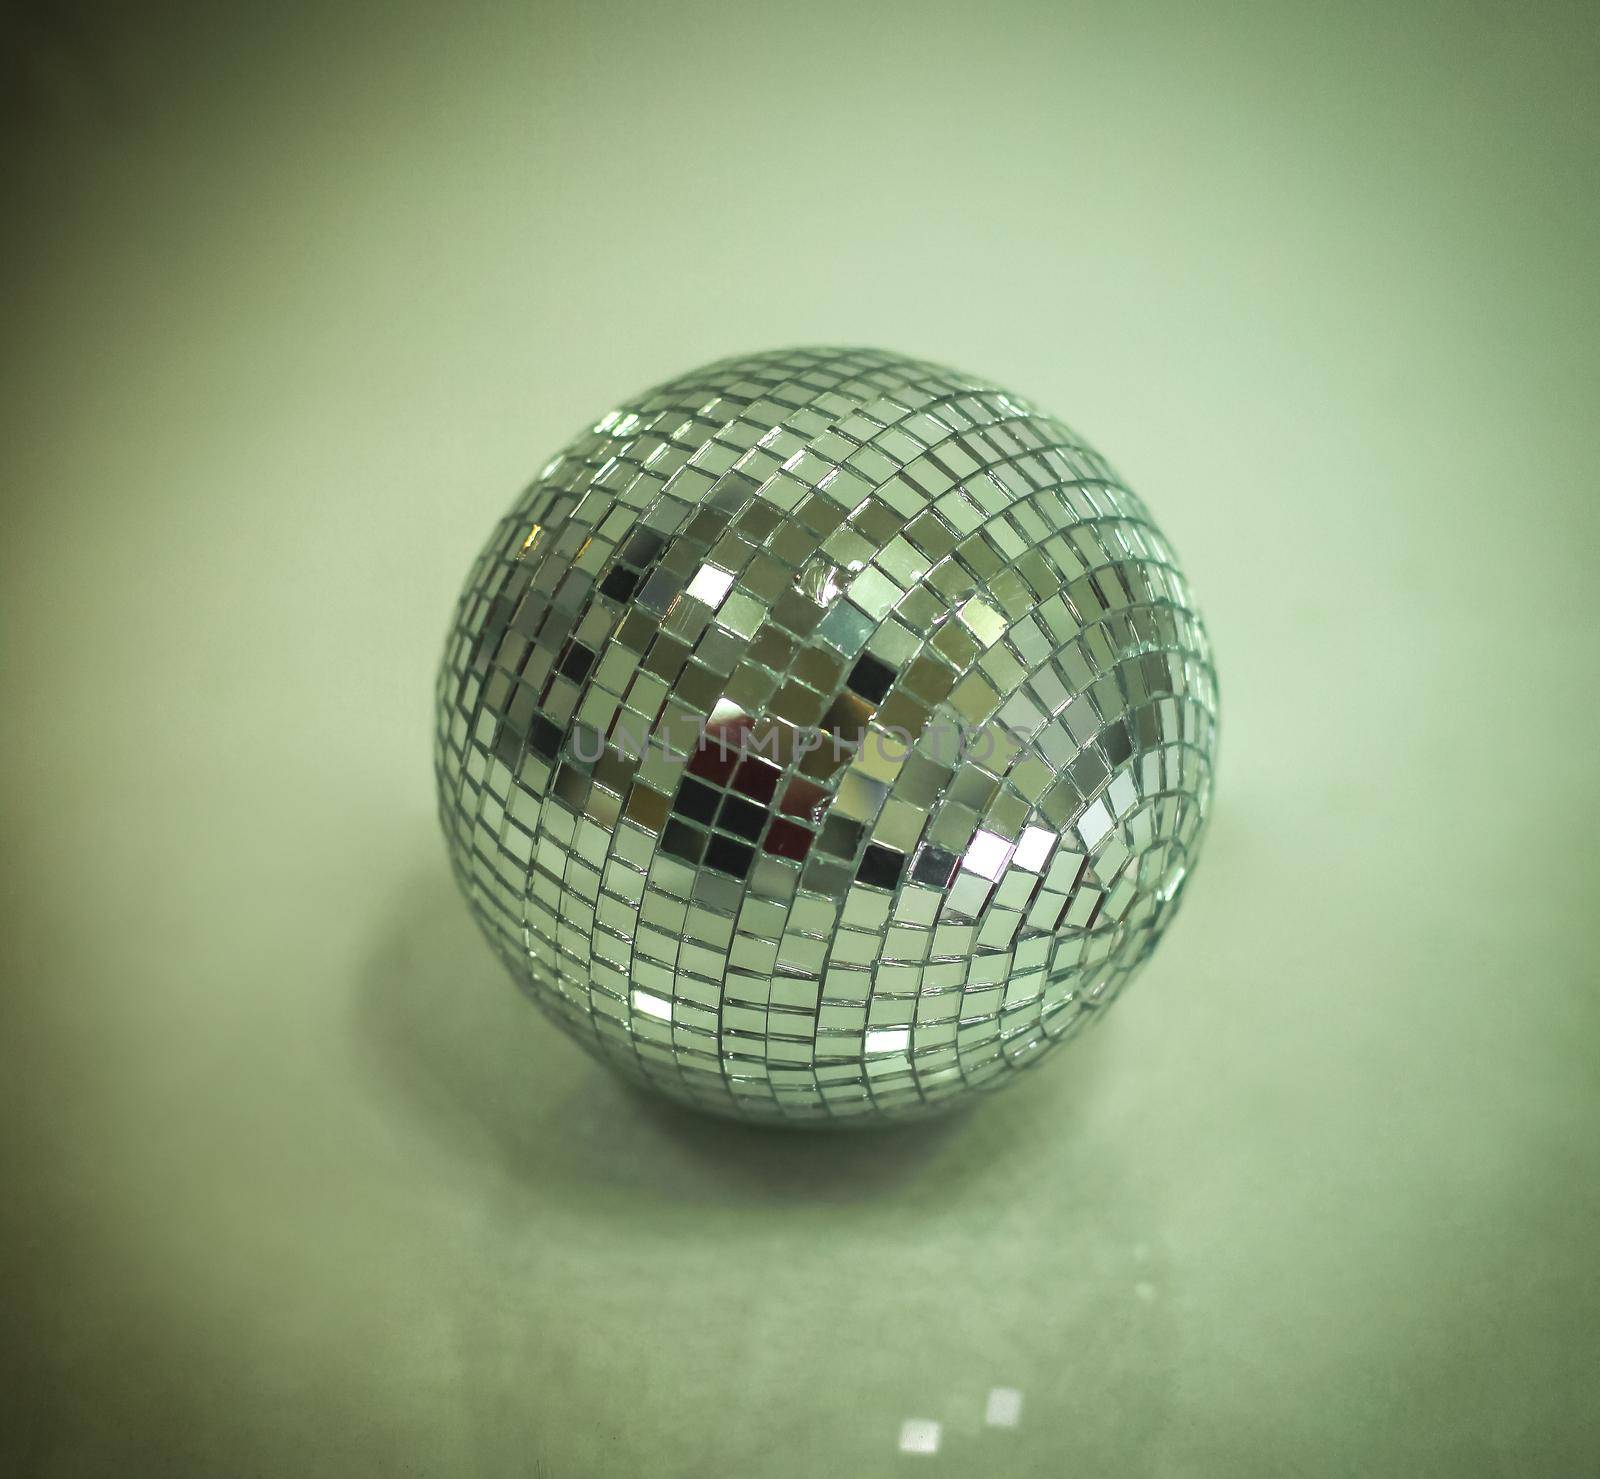 mirror ball.isolated on a dark background. by SmartPhotoLab